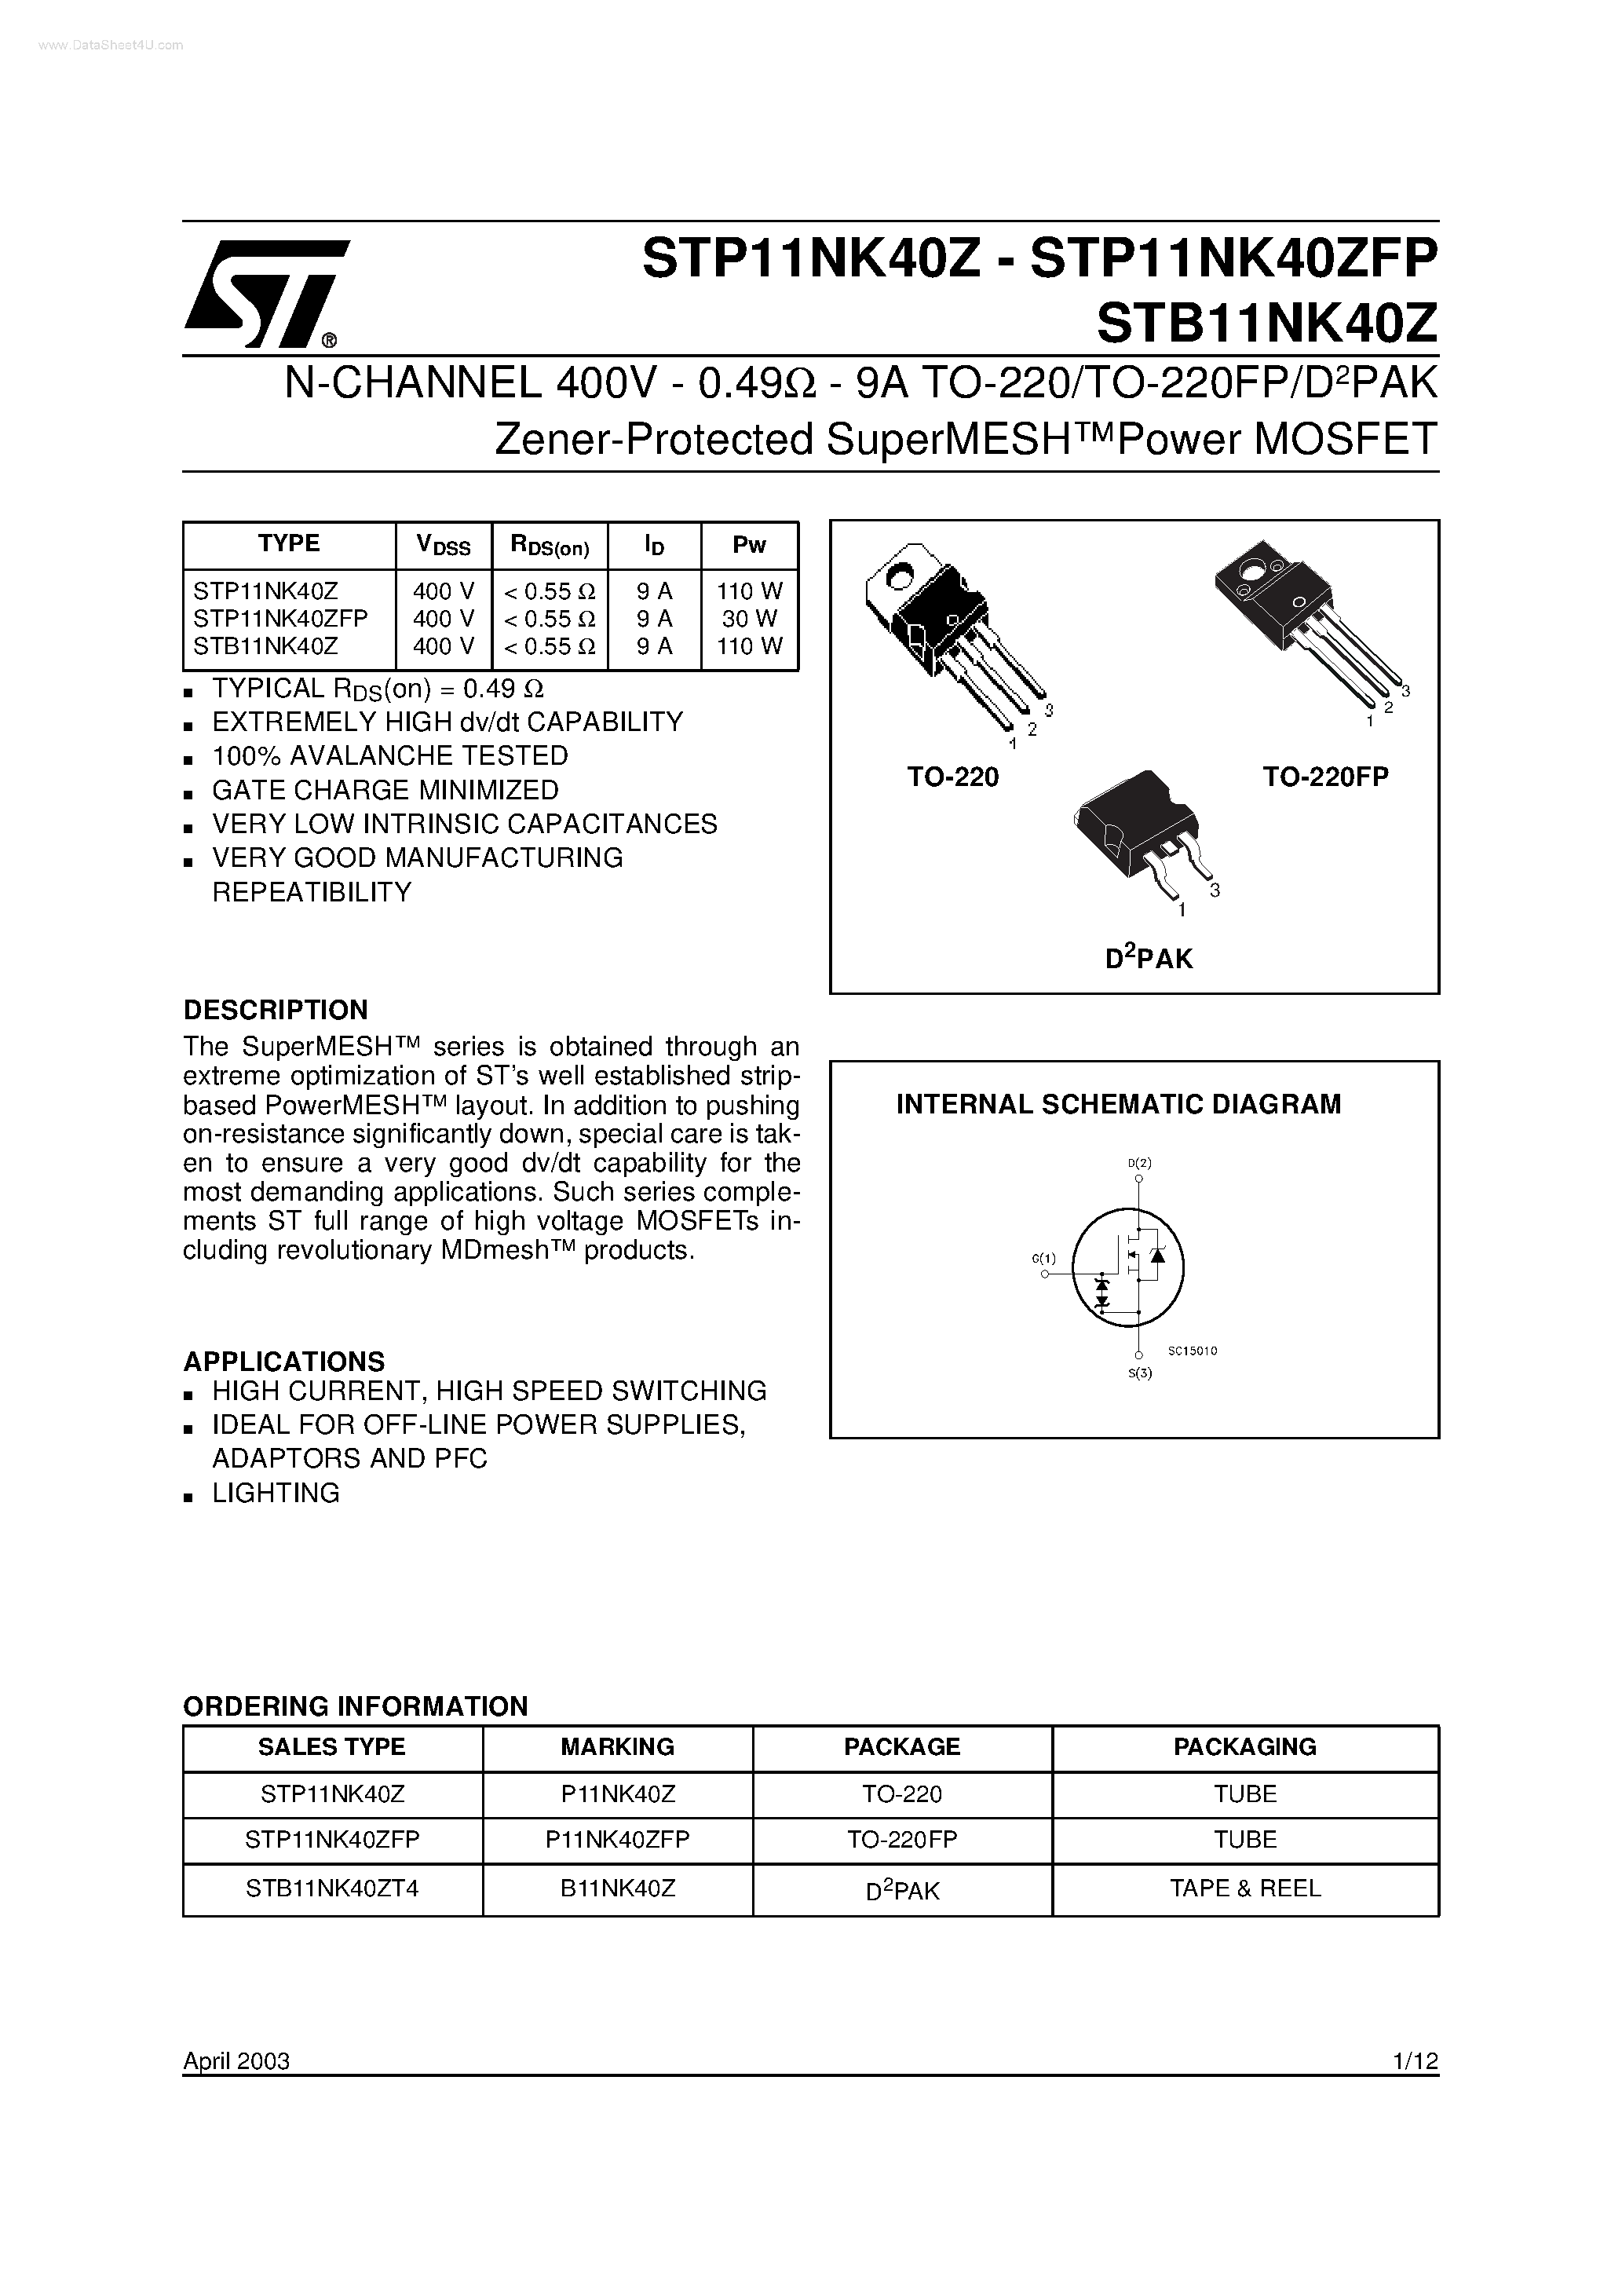 Datasheet STP11NK40Z - N-CHANNEL Power MOSFET page 1